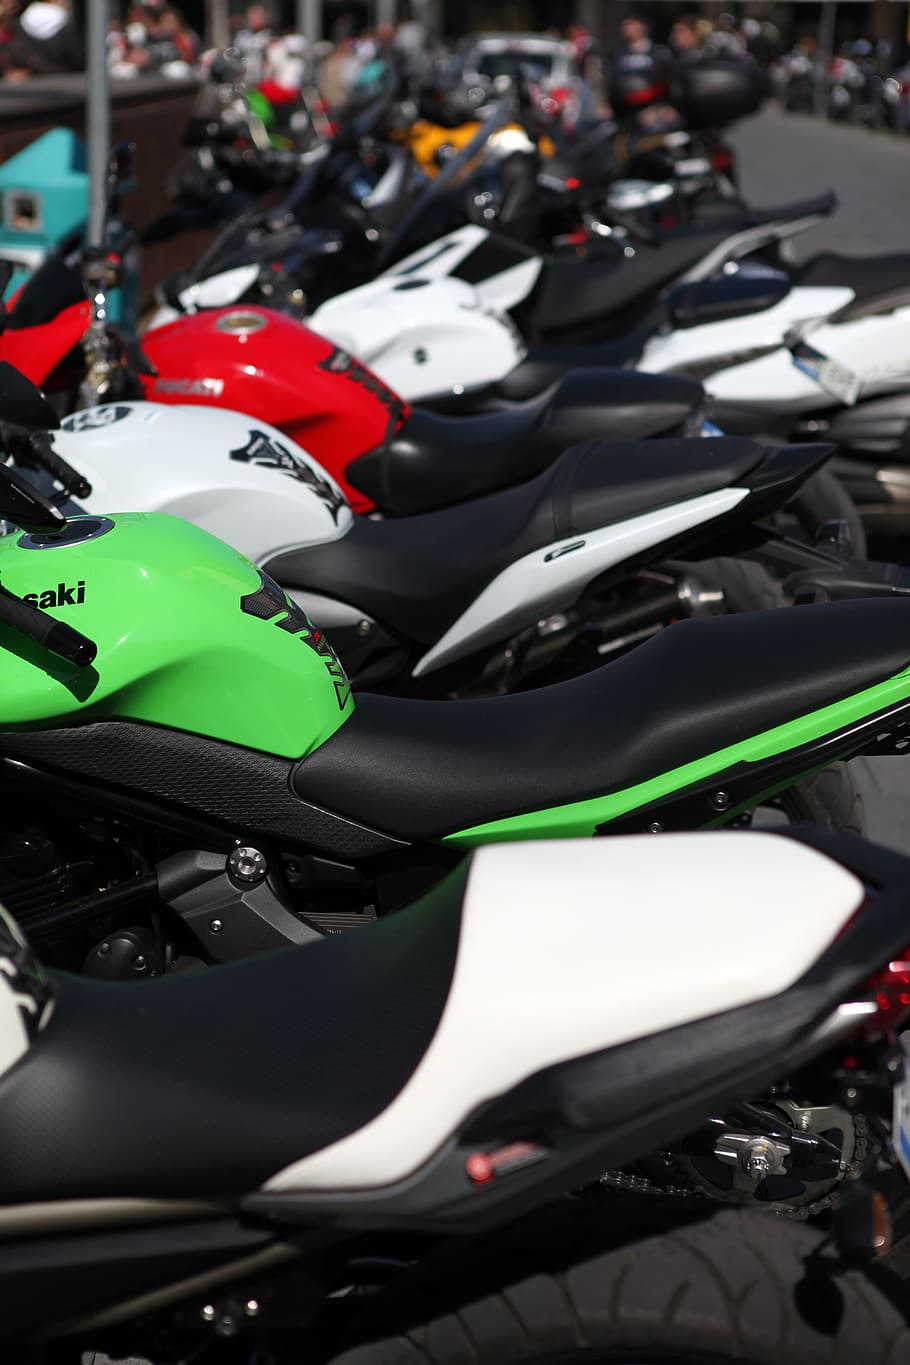 assorted-color sports bike lot, motorcycles, road manner, mode of transportation, HD wallpaper